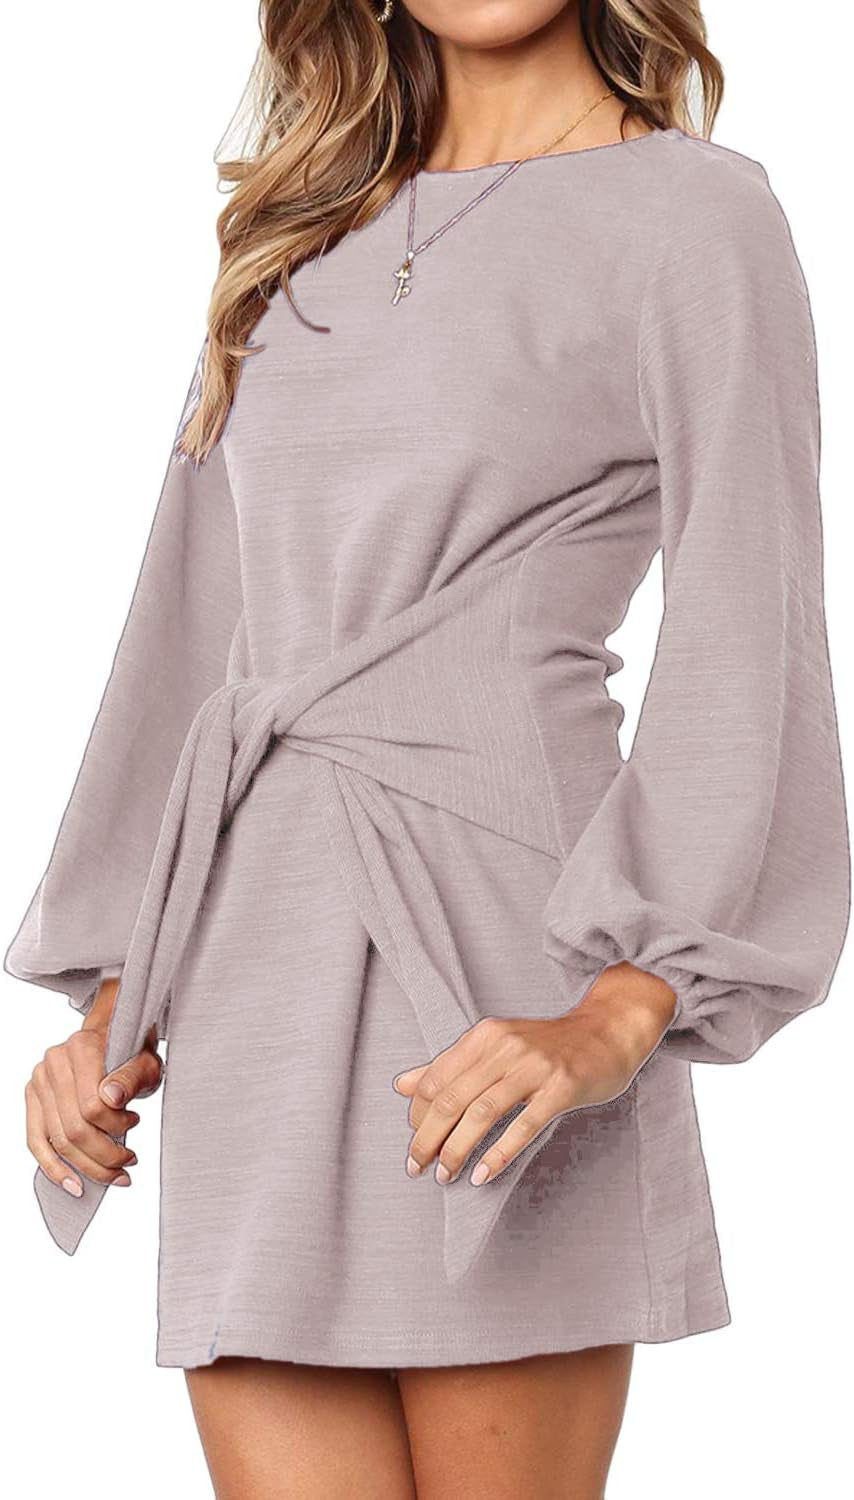 "Chic and Flattering Women'S Tie Waist Sweater Dress - Perfect for Casual or Cocktail Parties!"